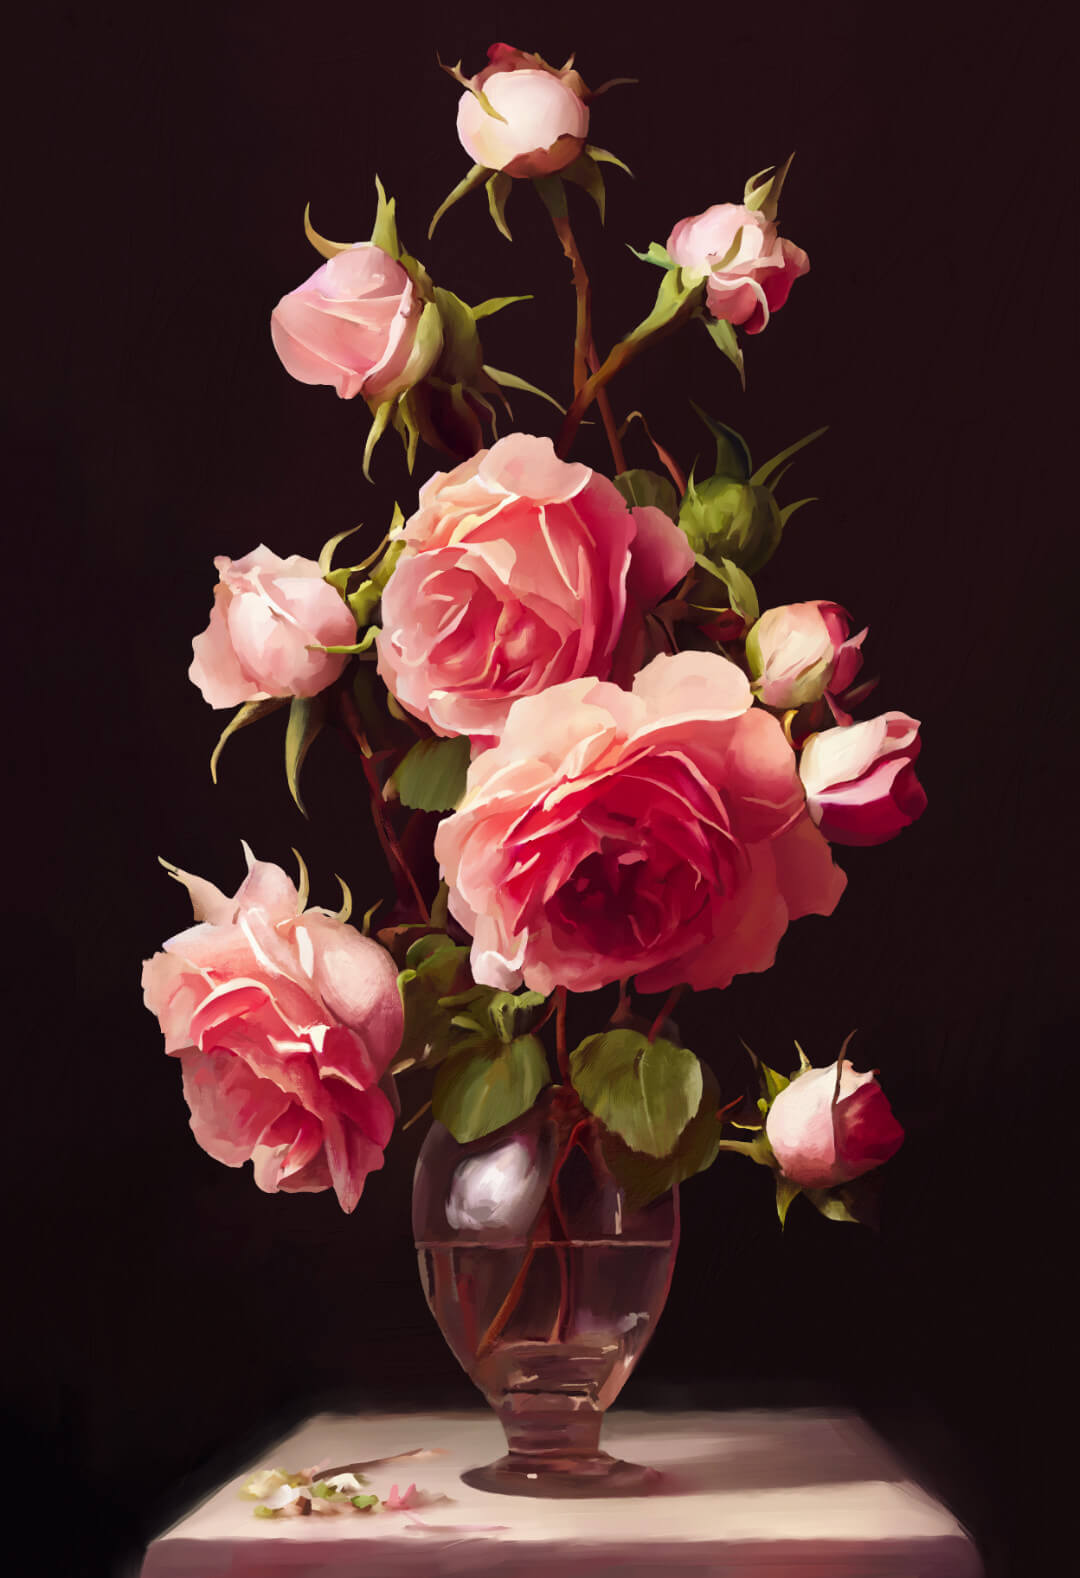 Digital oil painting of roses in the Baroque style.